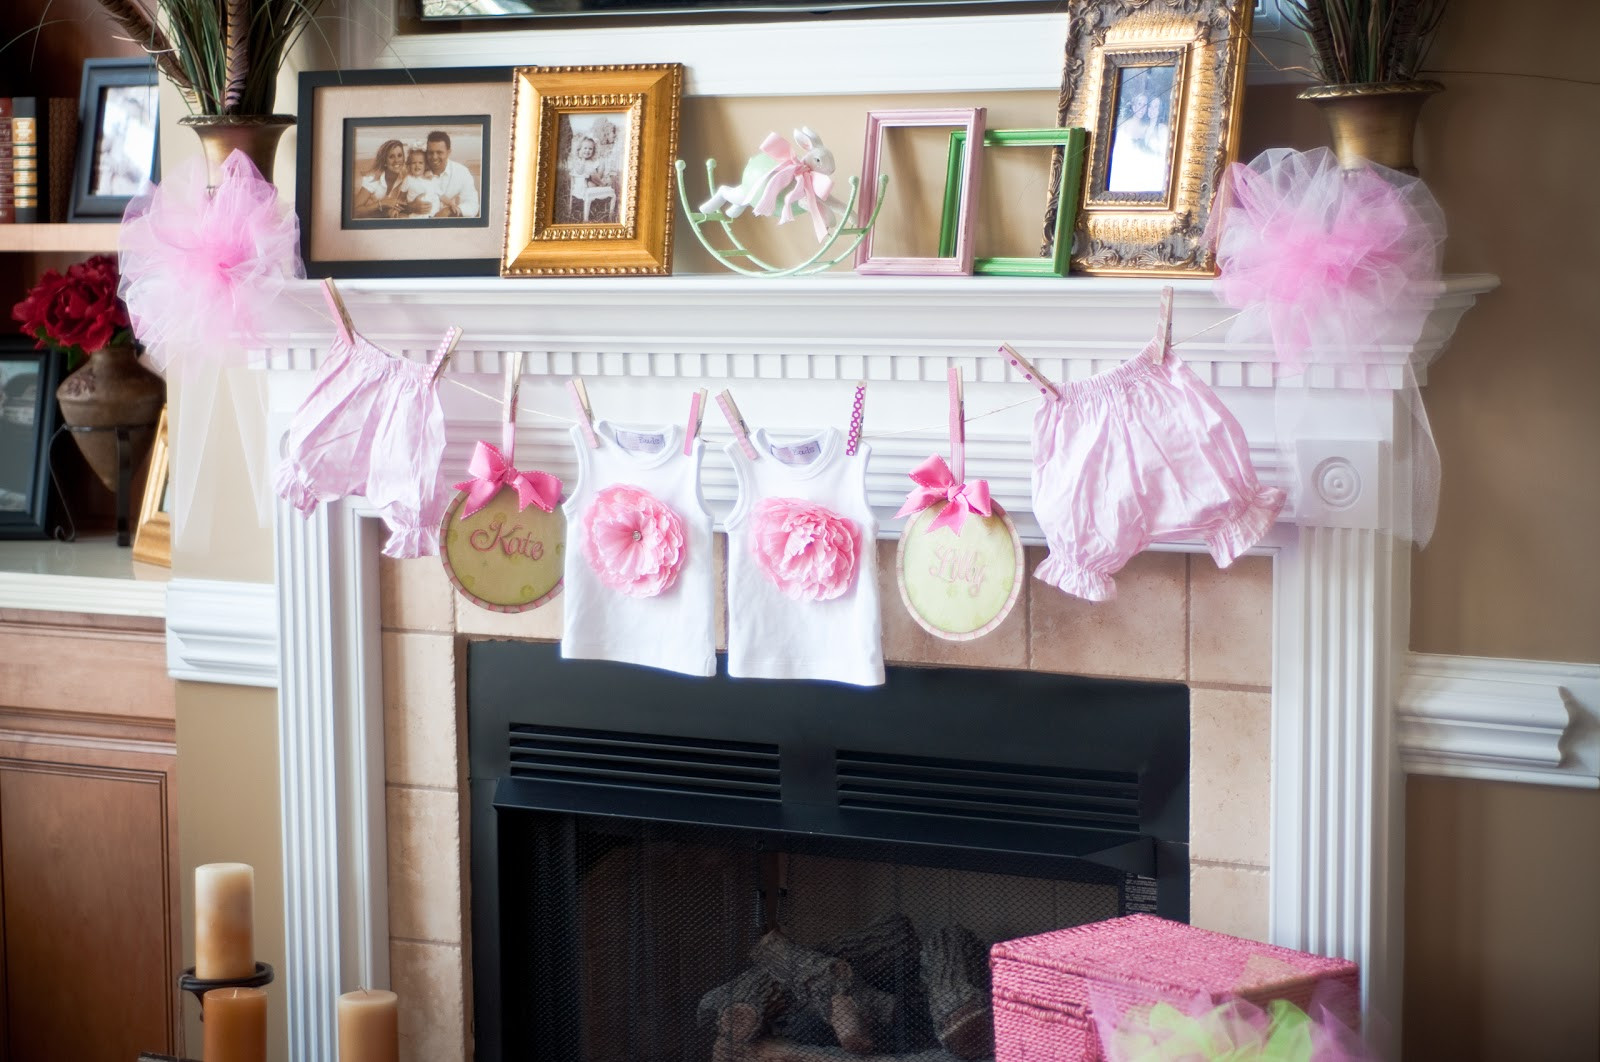 Baby Shower Decor Ideas
 paws & re thread baby shower decorating ideas clothes